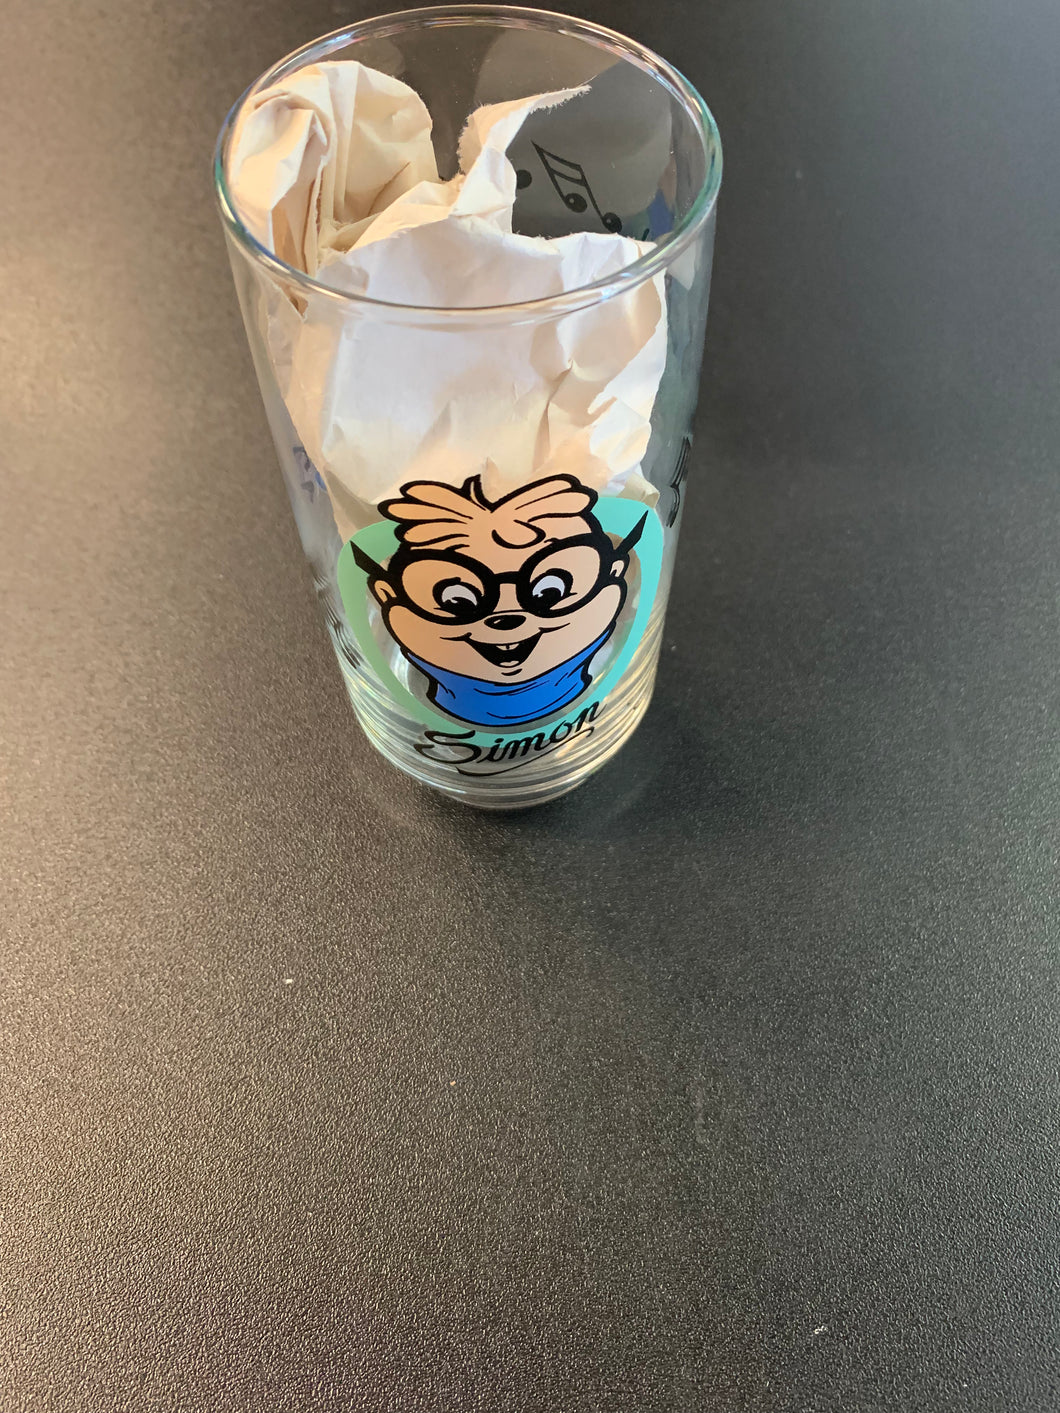 ALVIN AND THE CHIPMUNKS SIMON 1985 DRINKING GLASS